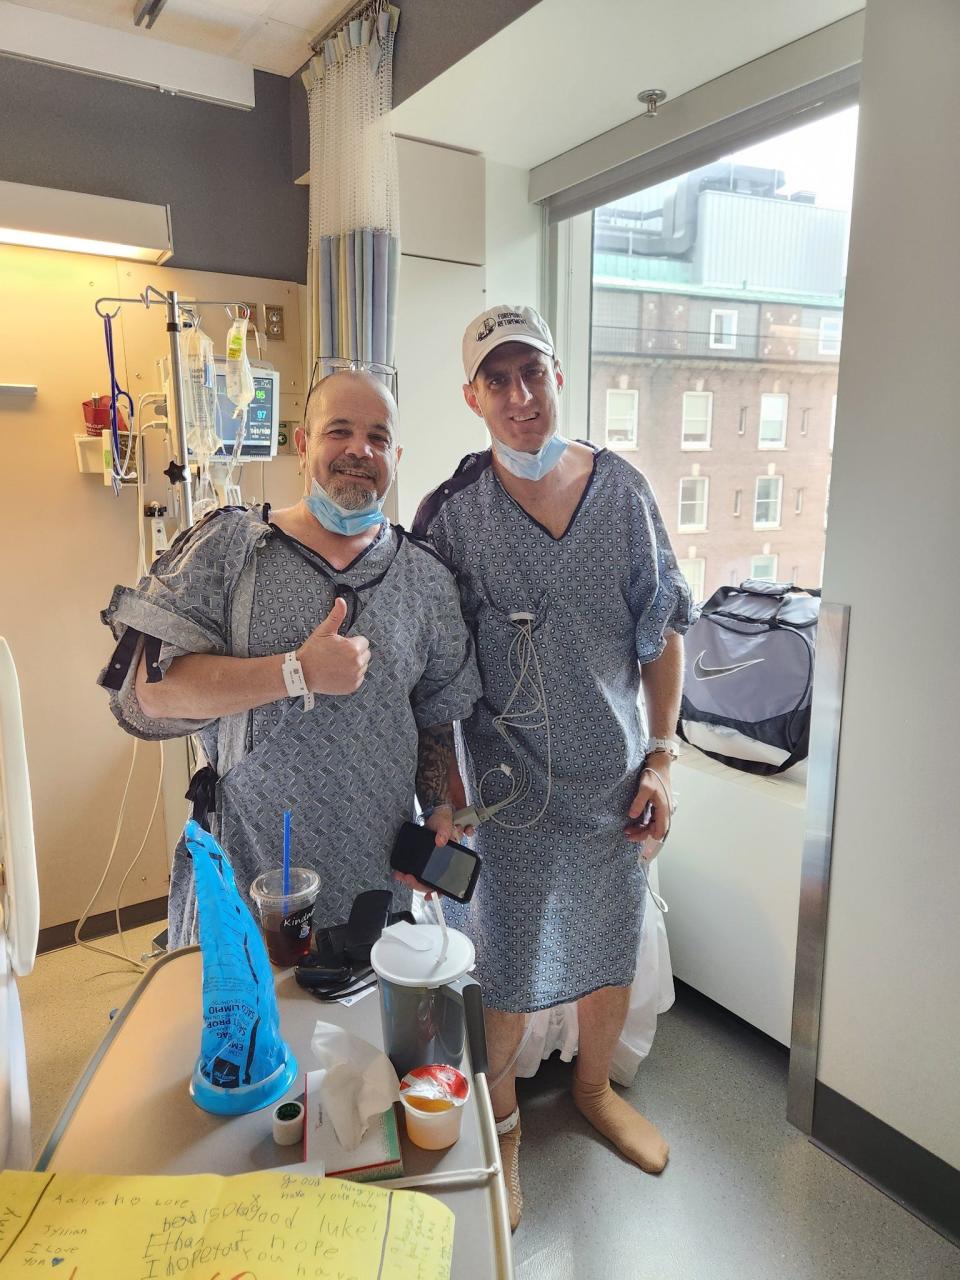 Former Quincy City Councilor Brad Croall, right, and his kidney donor, Mike Smith, one day after the transplant.